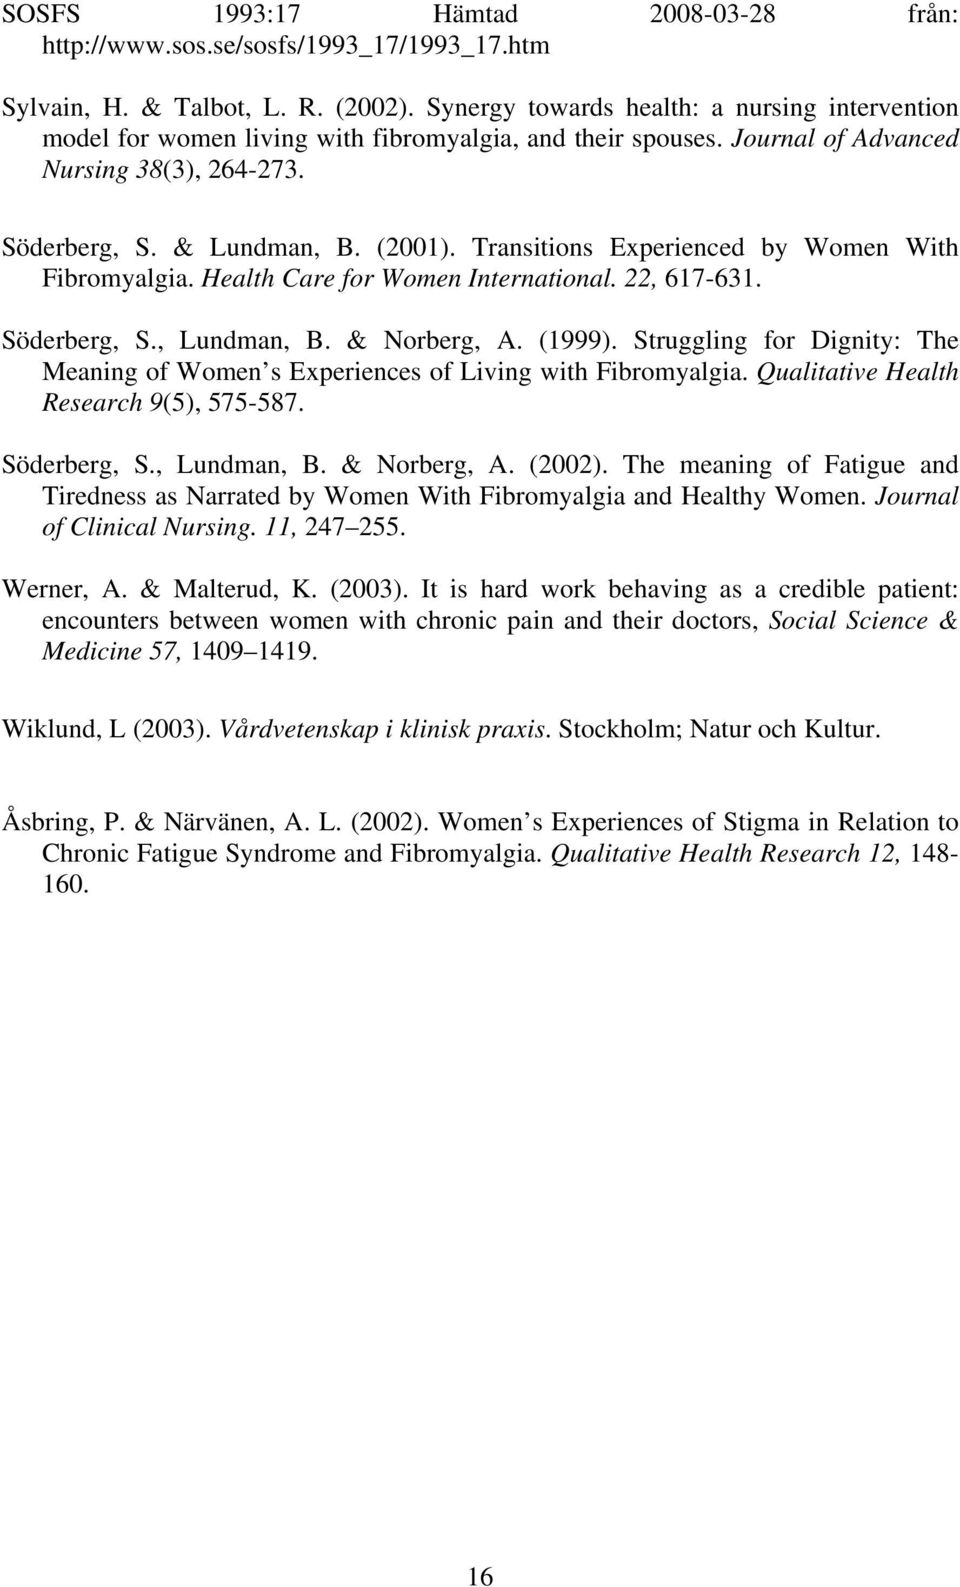 Transitions Experienced by Women With Fibromyalgia. Health Care for Women International. 22, 617-631. Söderberg, S., Lundman, B. & Norberg, A. (1999).